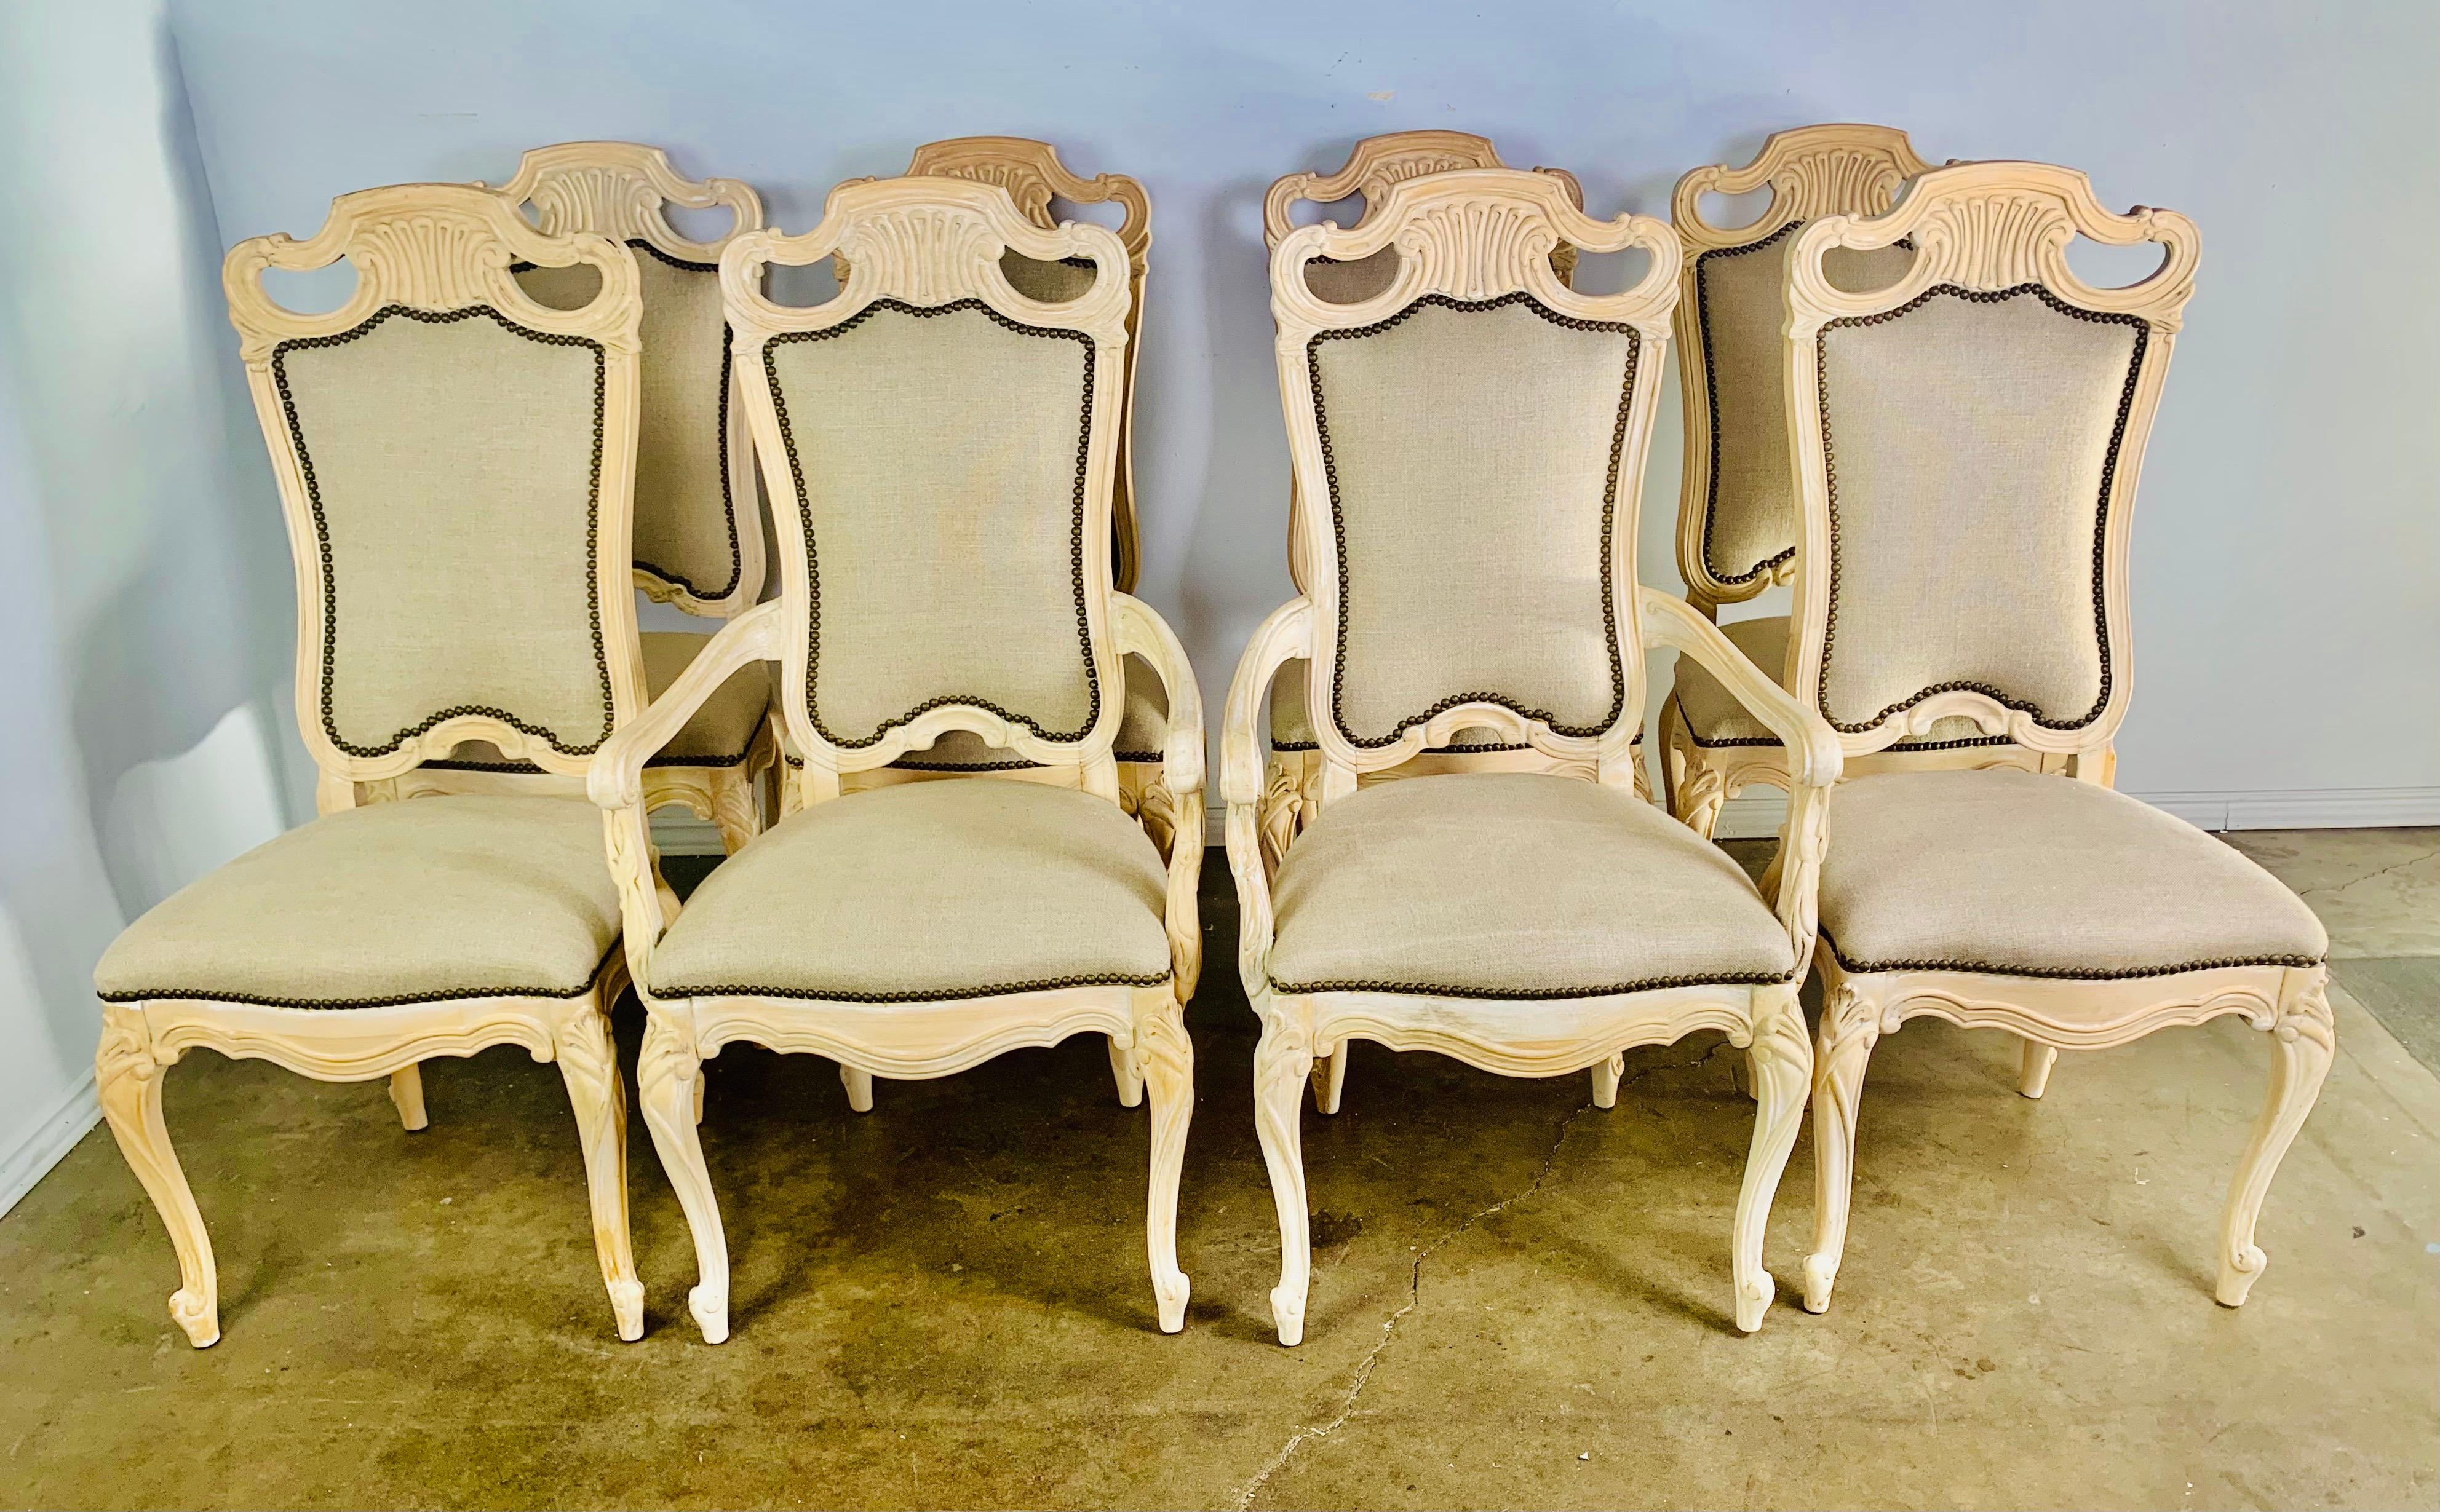 Set of eight French natural carved wood dining chairs. The chairs stand on four cabriole legs with rams head feet. The chairs are newly upholstered in a washed Belgium linen with nailhead trim detail.

Armchair size: 23